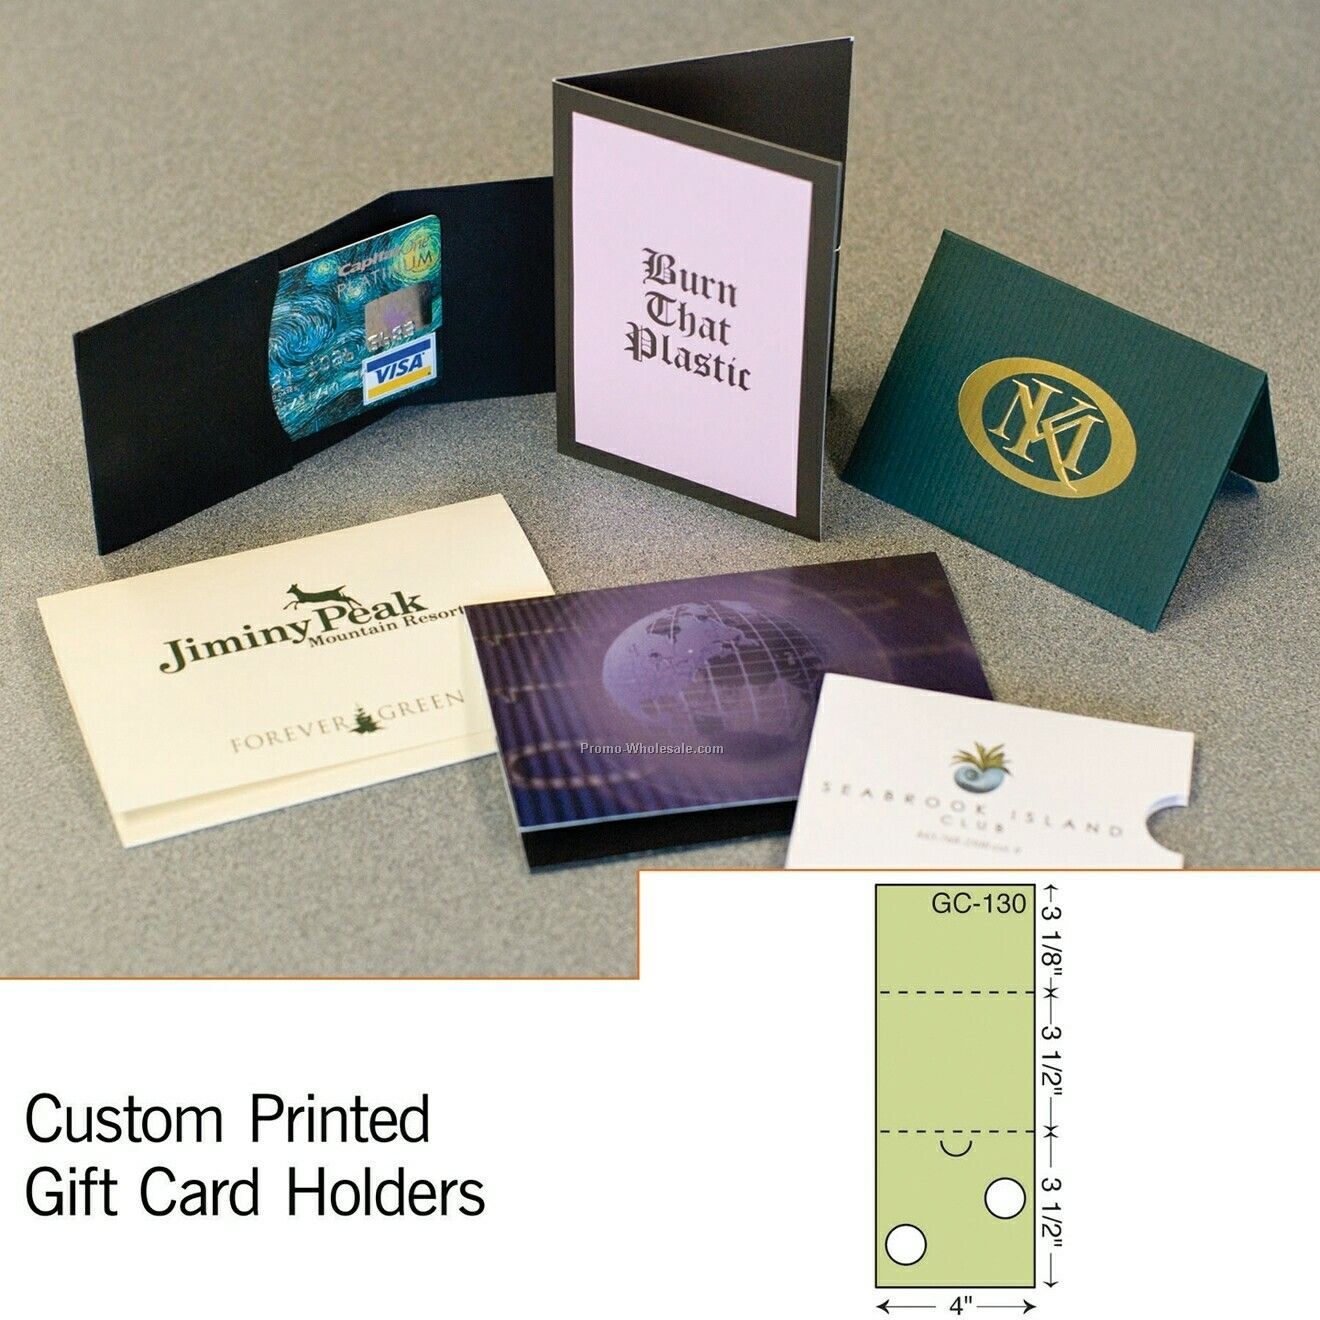 2-1/2"x3-1/2" Card Sleeve W/ Double Thumb Cut (Foil Stamp/Emboss)